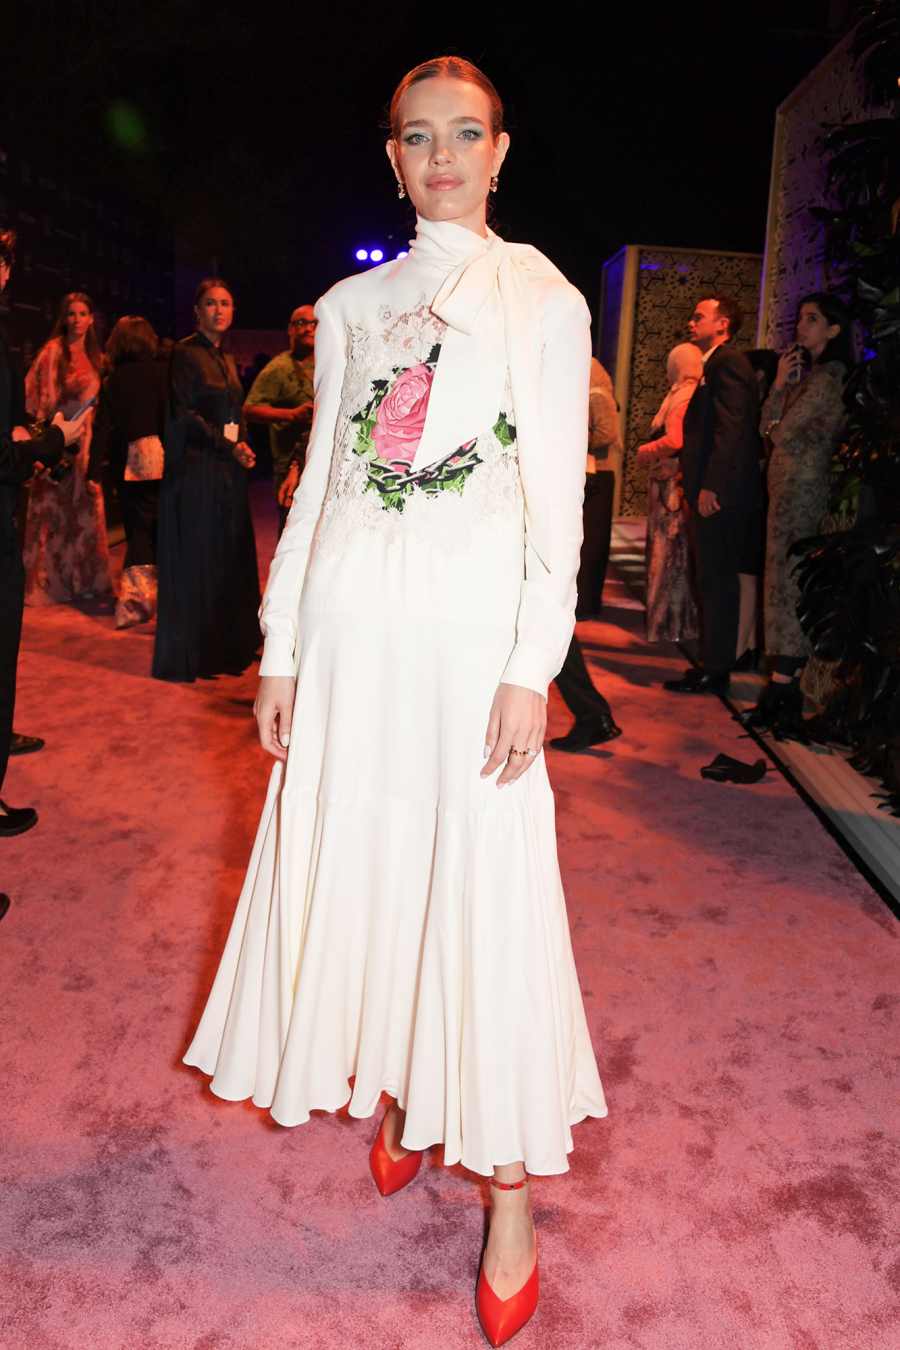 Natalia Vodianova The Best Looks From the Fashion Trust Arabia Prize Awards